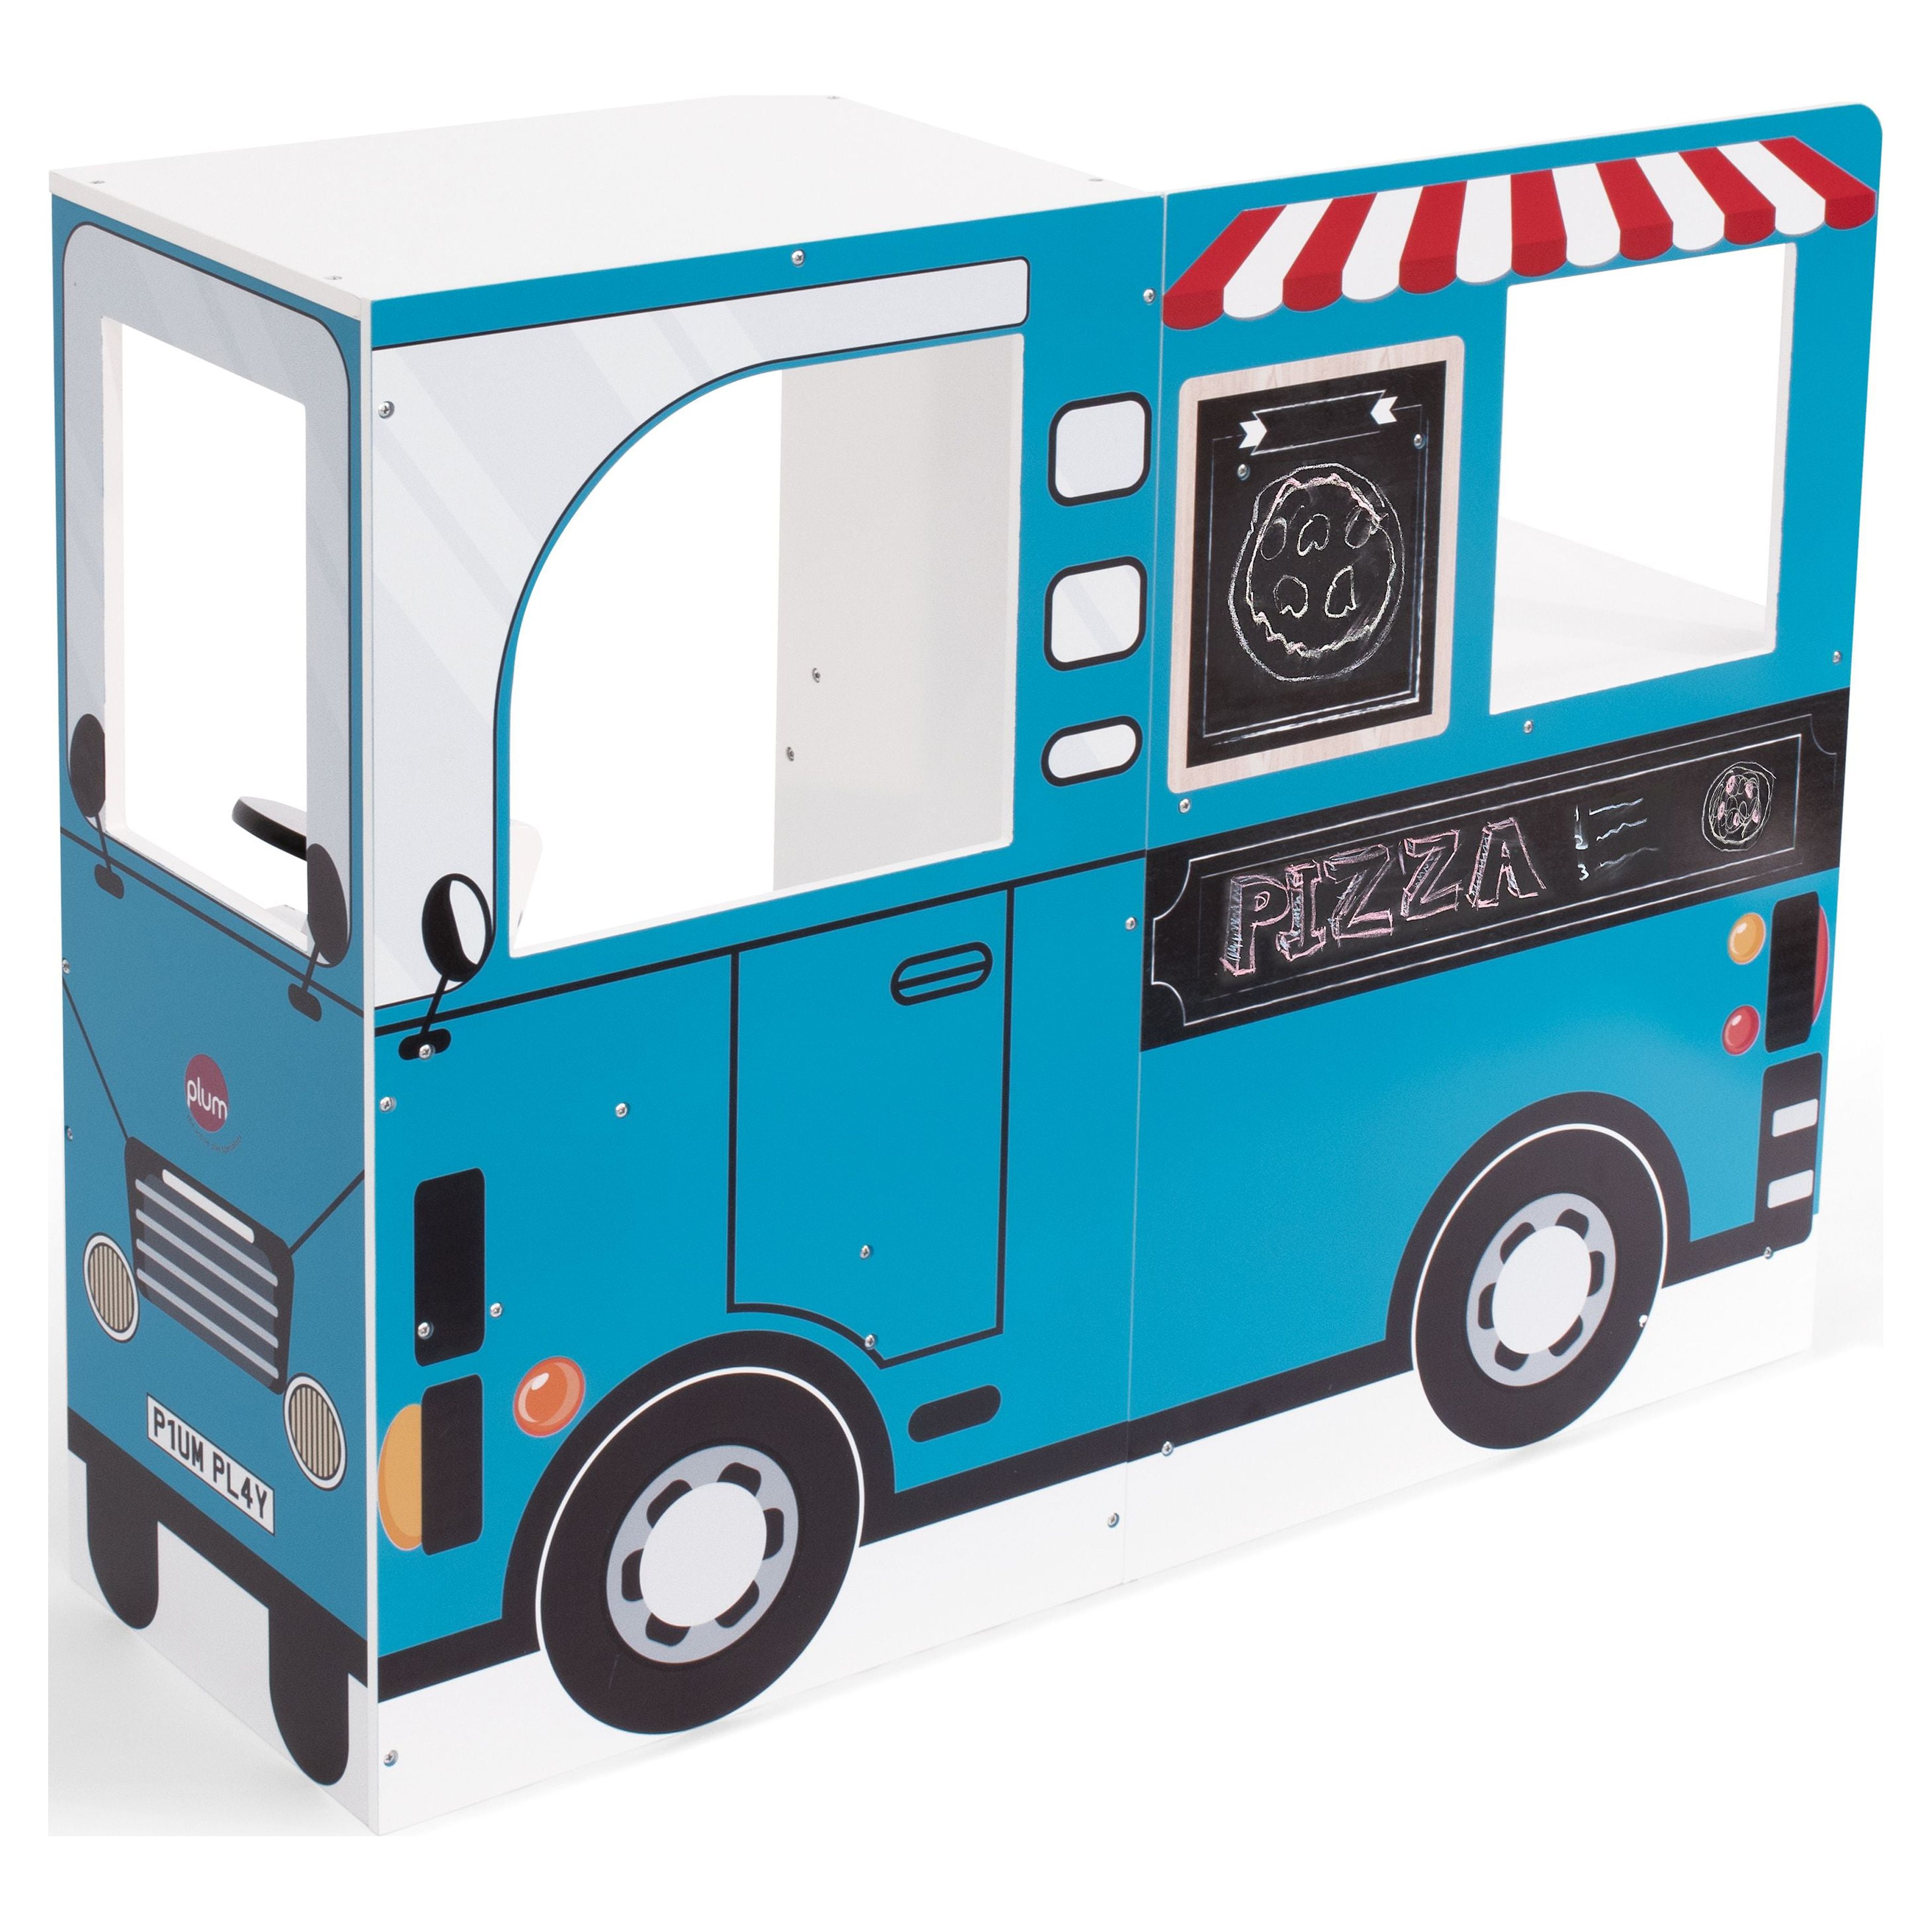 Plum Play 3-in-1 Wooden Street Food Truck and Kitchen with Driving Cab, #41108AD83, Light-Up Burners with Sound, Kitchen Utensils.  41.33" x 12" x 31.5" - image 1 of 19